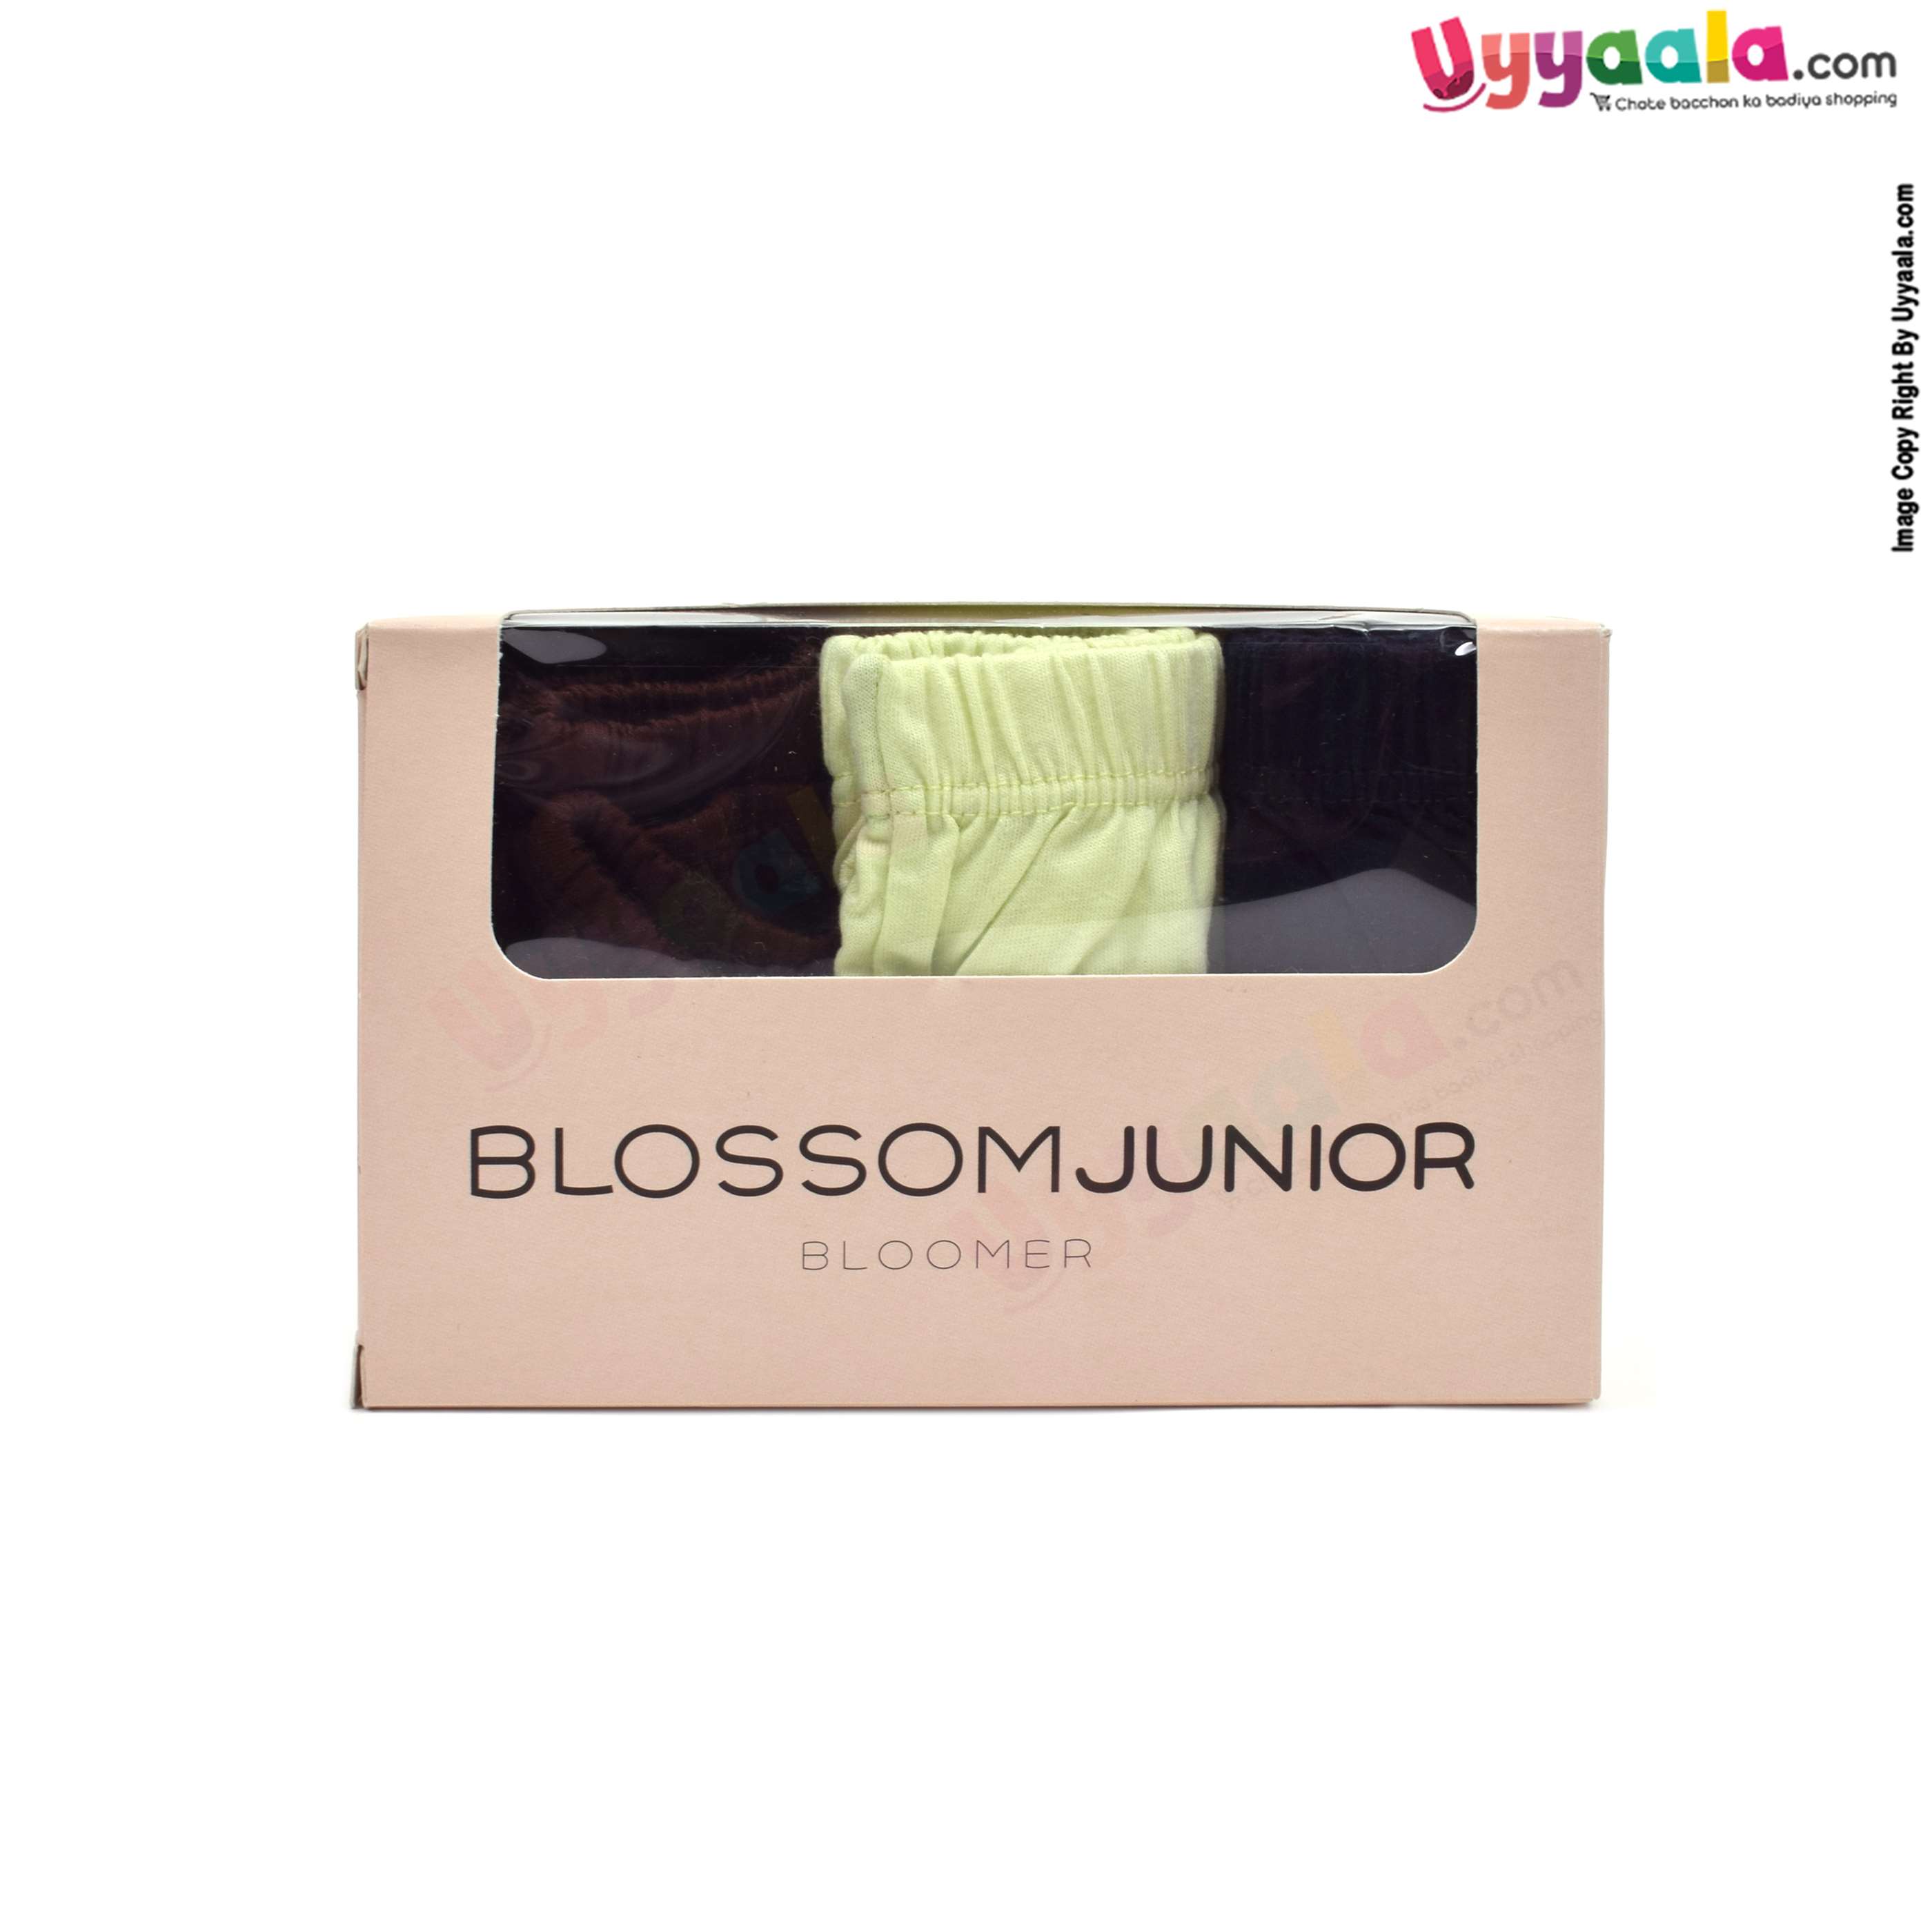 BLOSSOM JUNIOR Bloomer, premium cotton for girls, pack of 3 - multicolor, 4 - 6 years